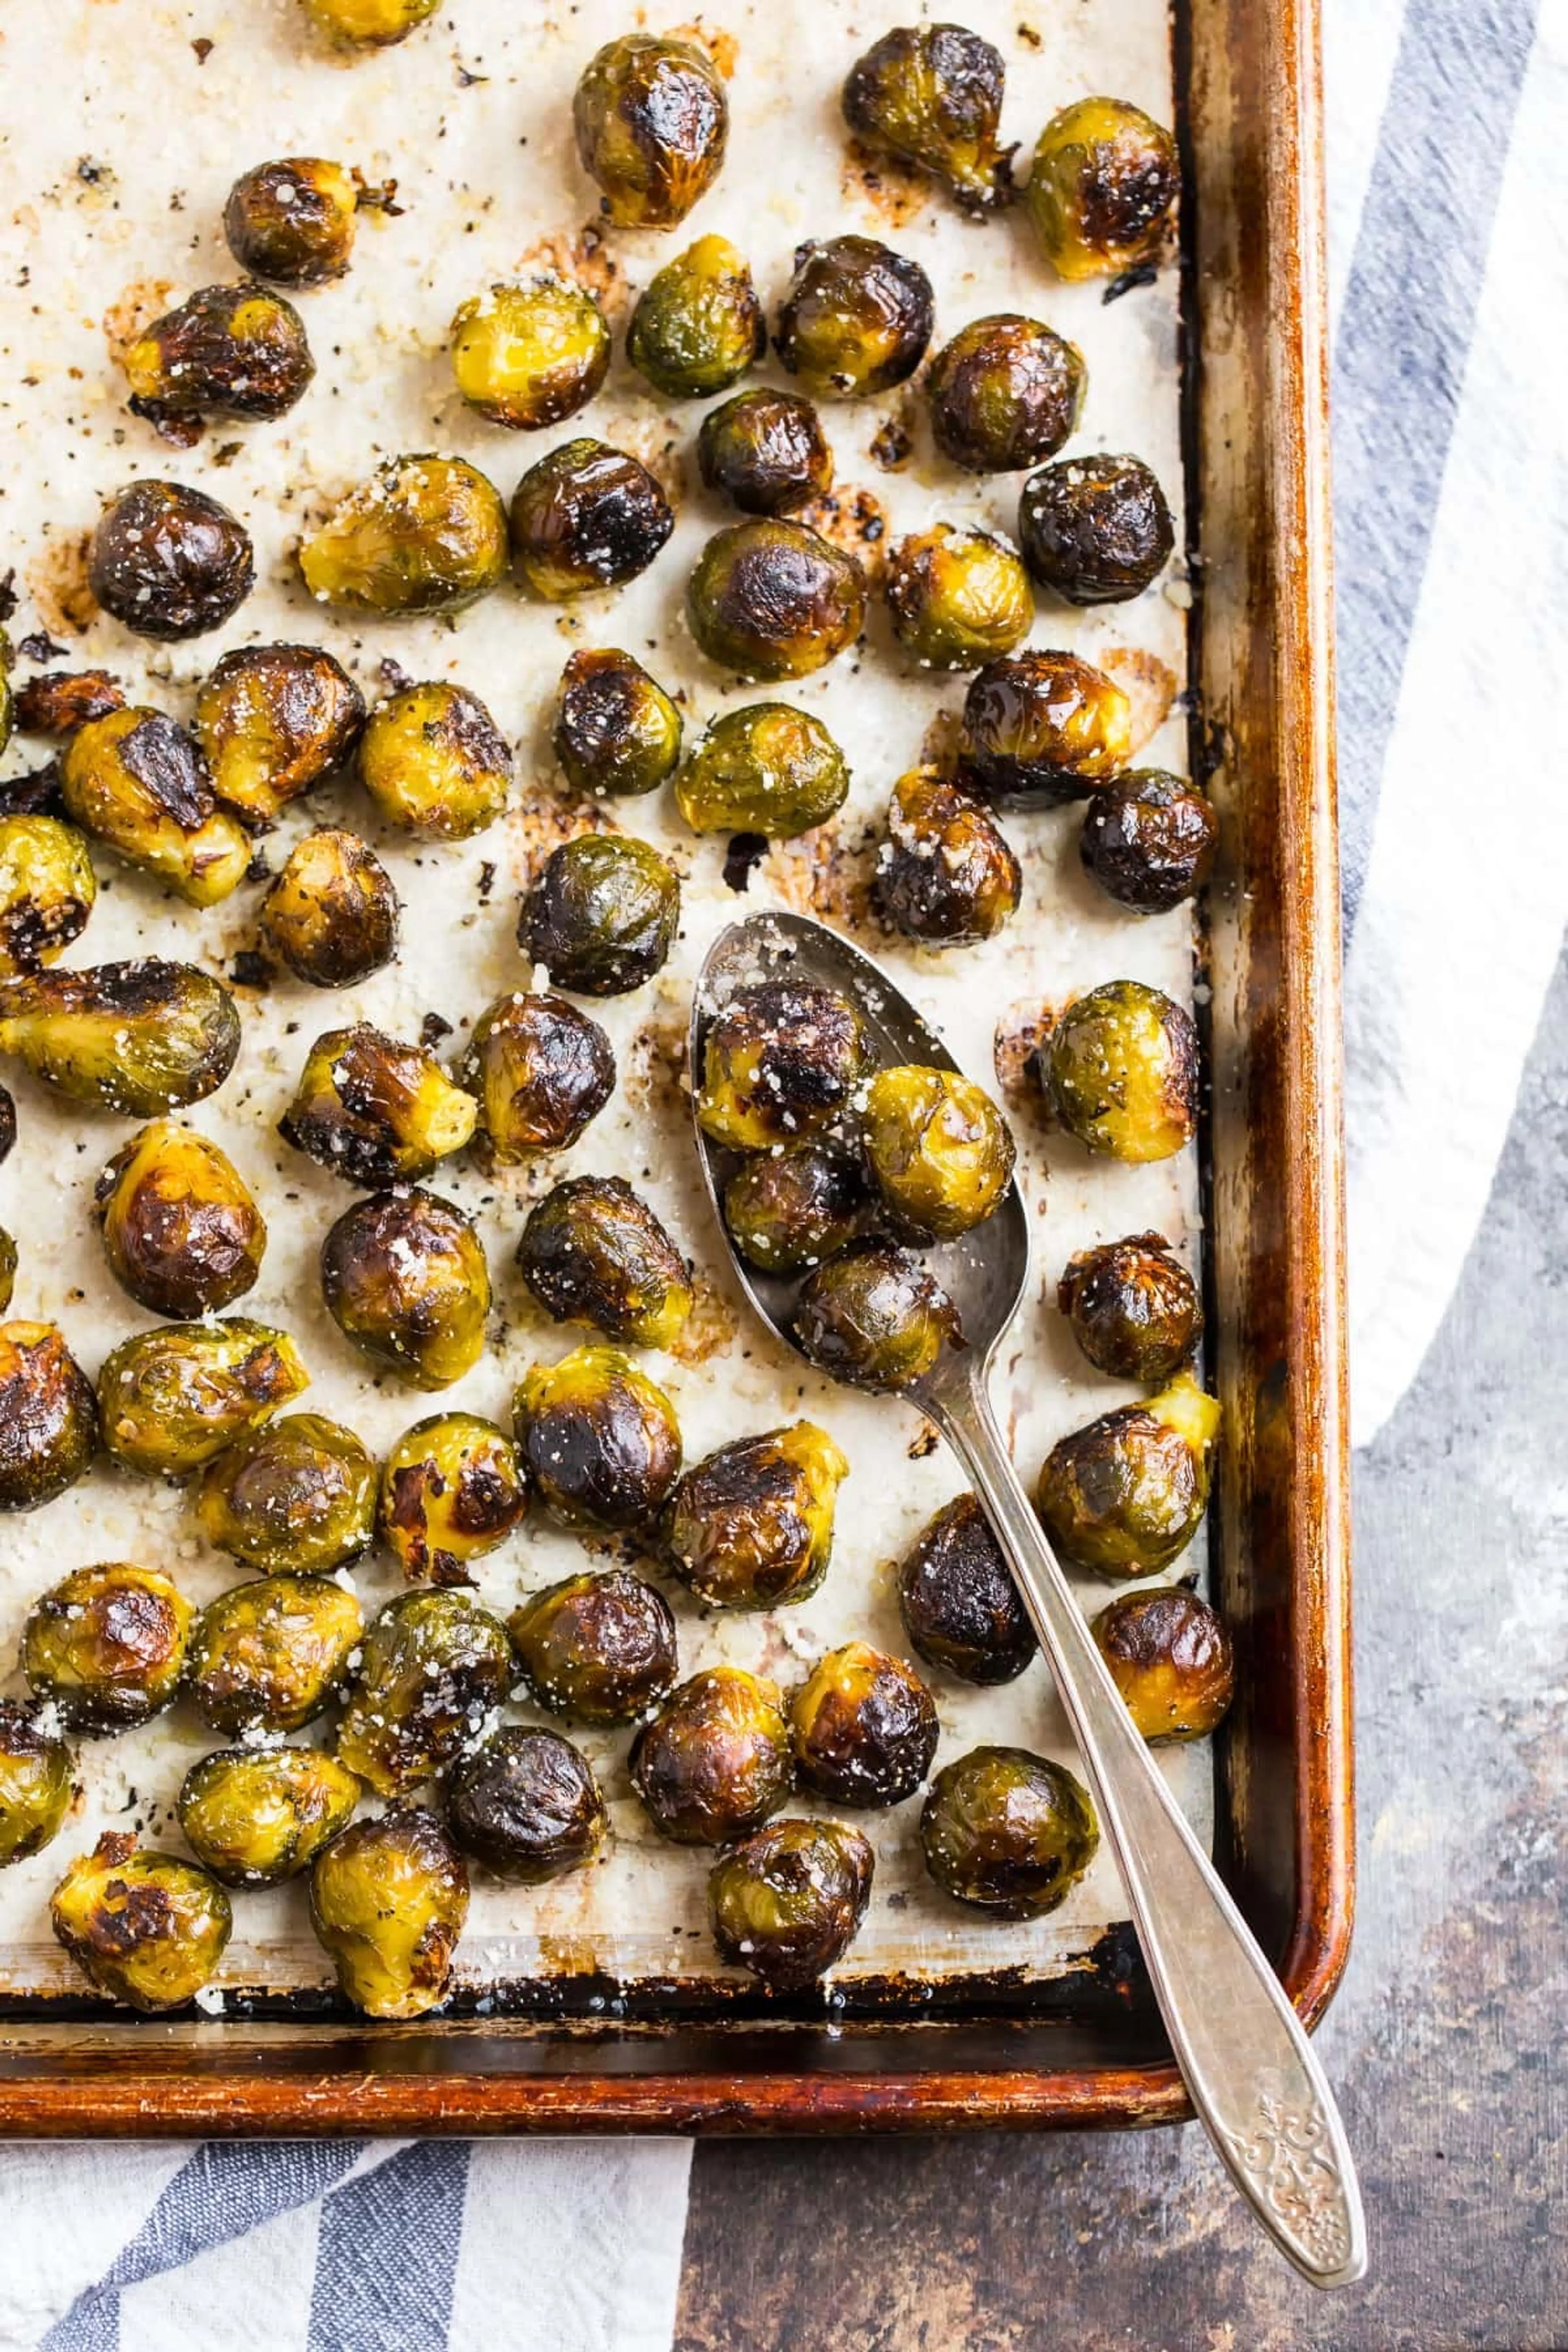 Roasted Frozen Brussels Sprouts